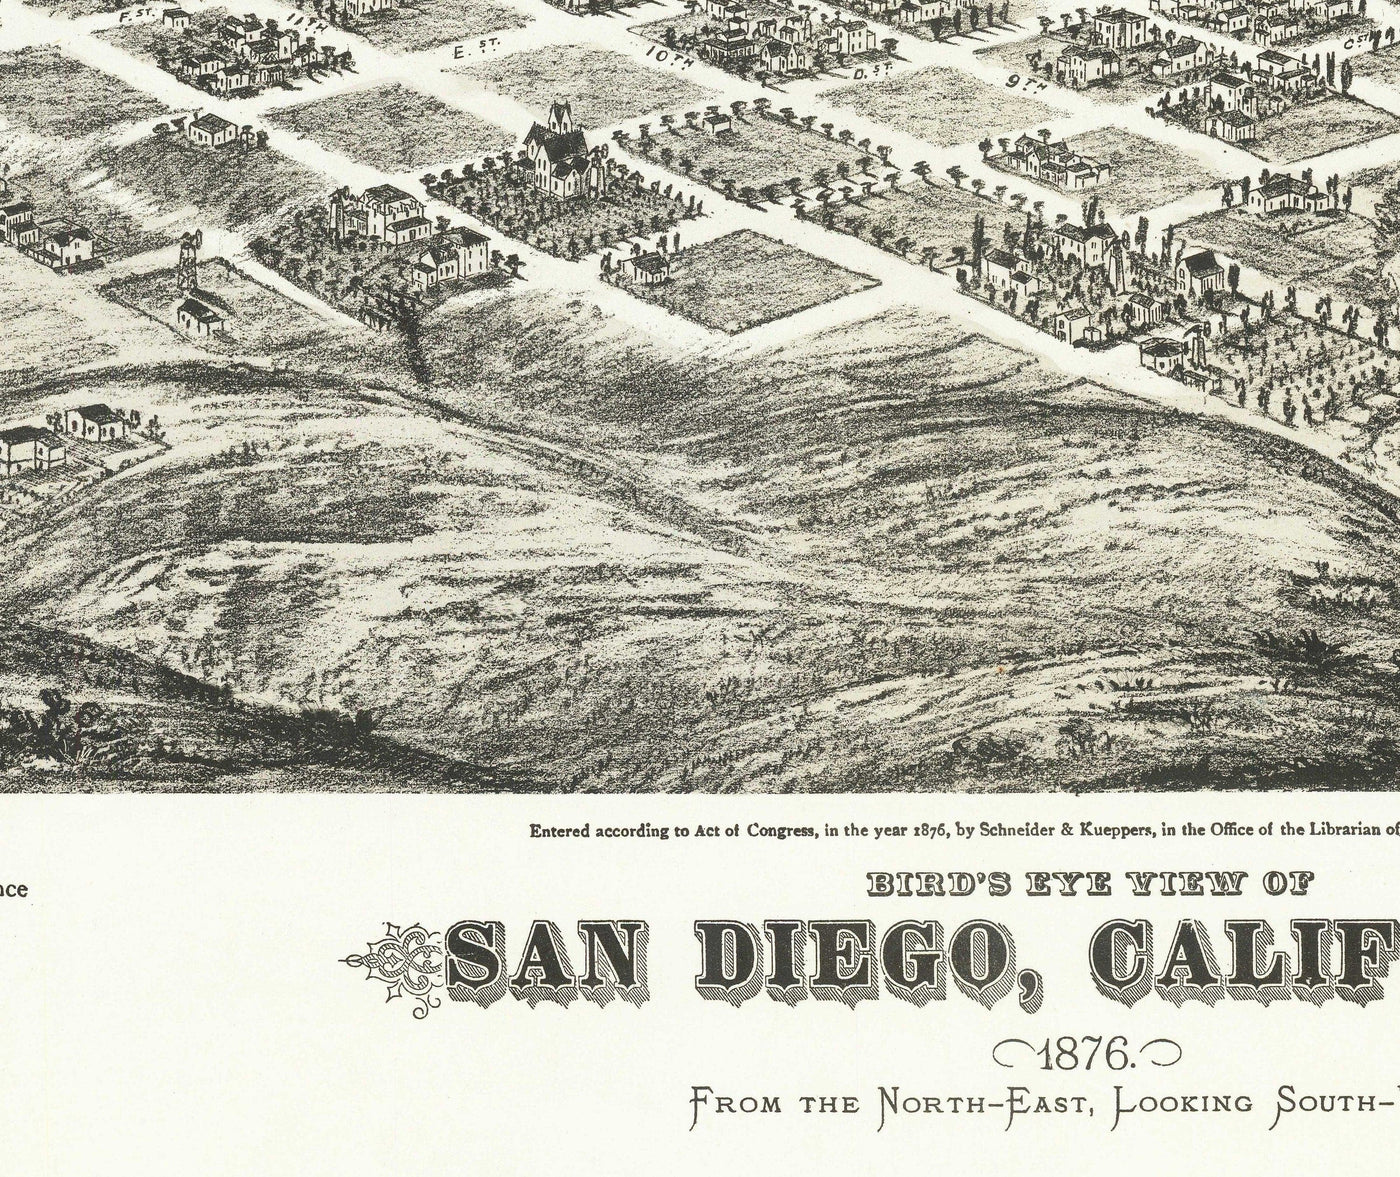 Rare Old Map of San Diego by Eli Sheldon Glover, 1876 - Birds Eye, Downtown Oldtown, East Village, Cortez Hill